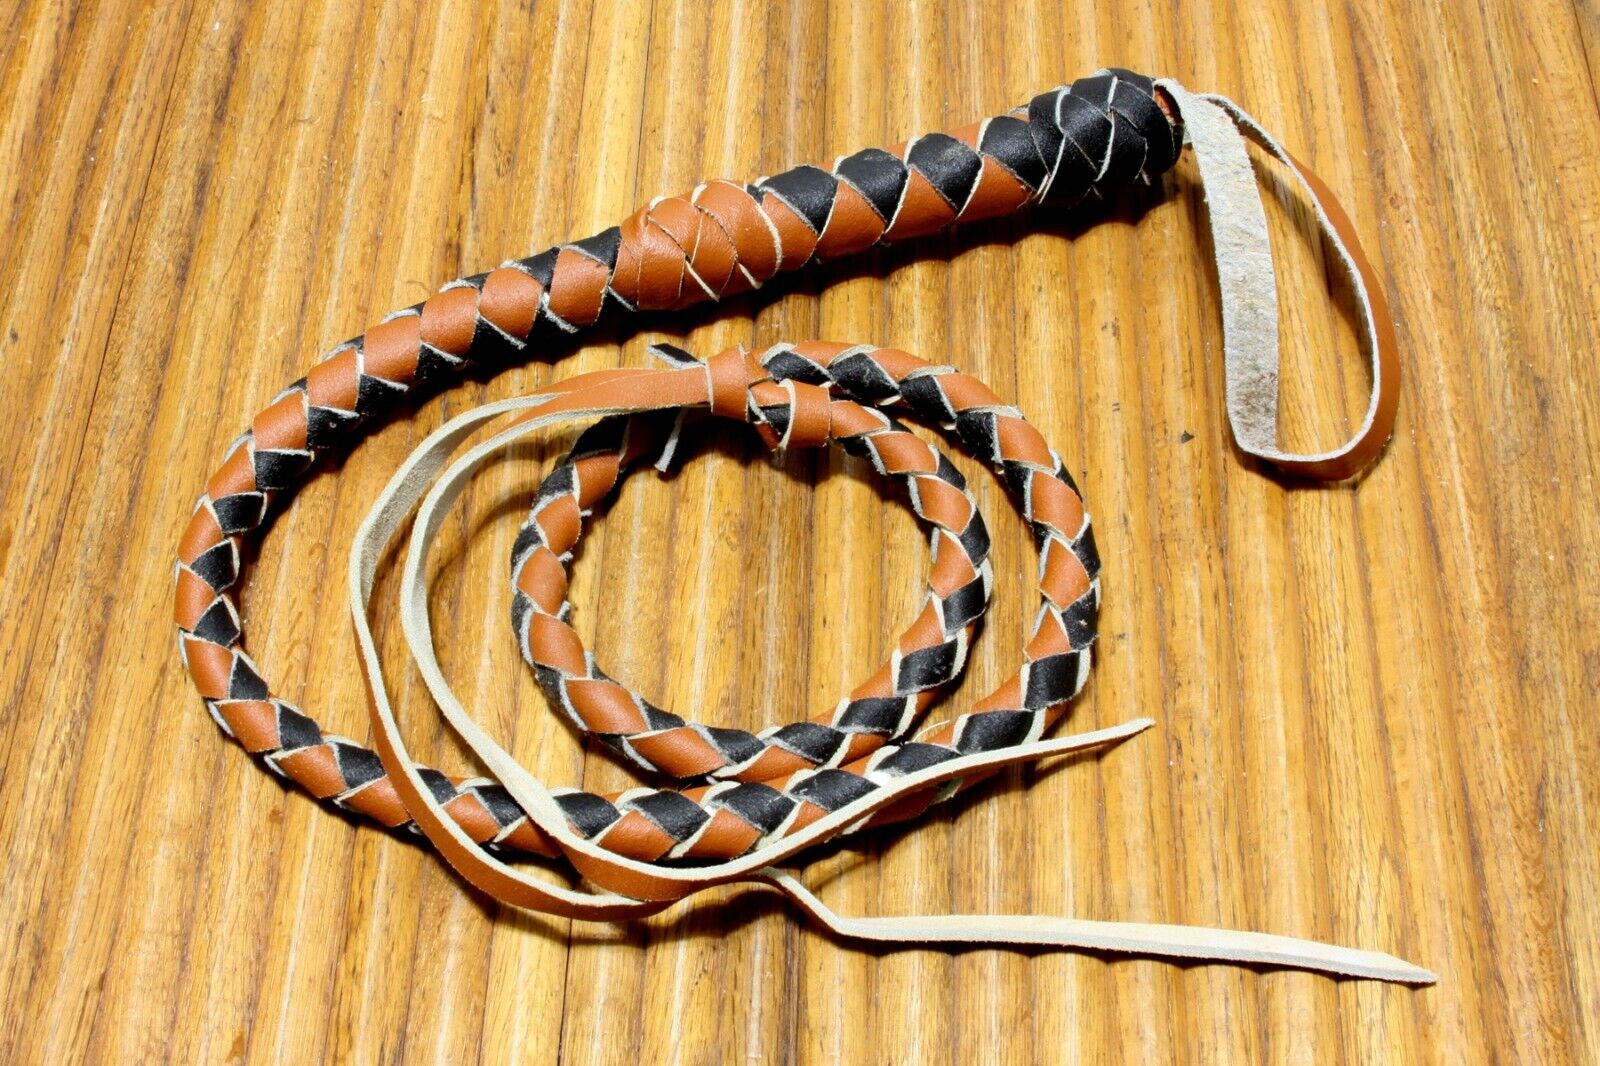 Vintage 6 Ft Rawhide Leather Bullwhip Black & Brown Braided Indiana Jones Style